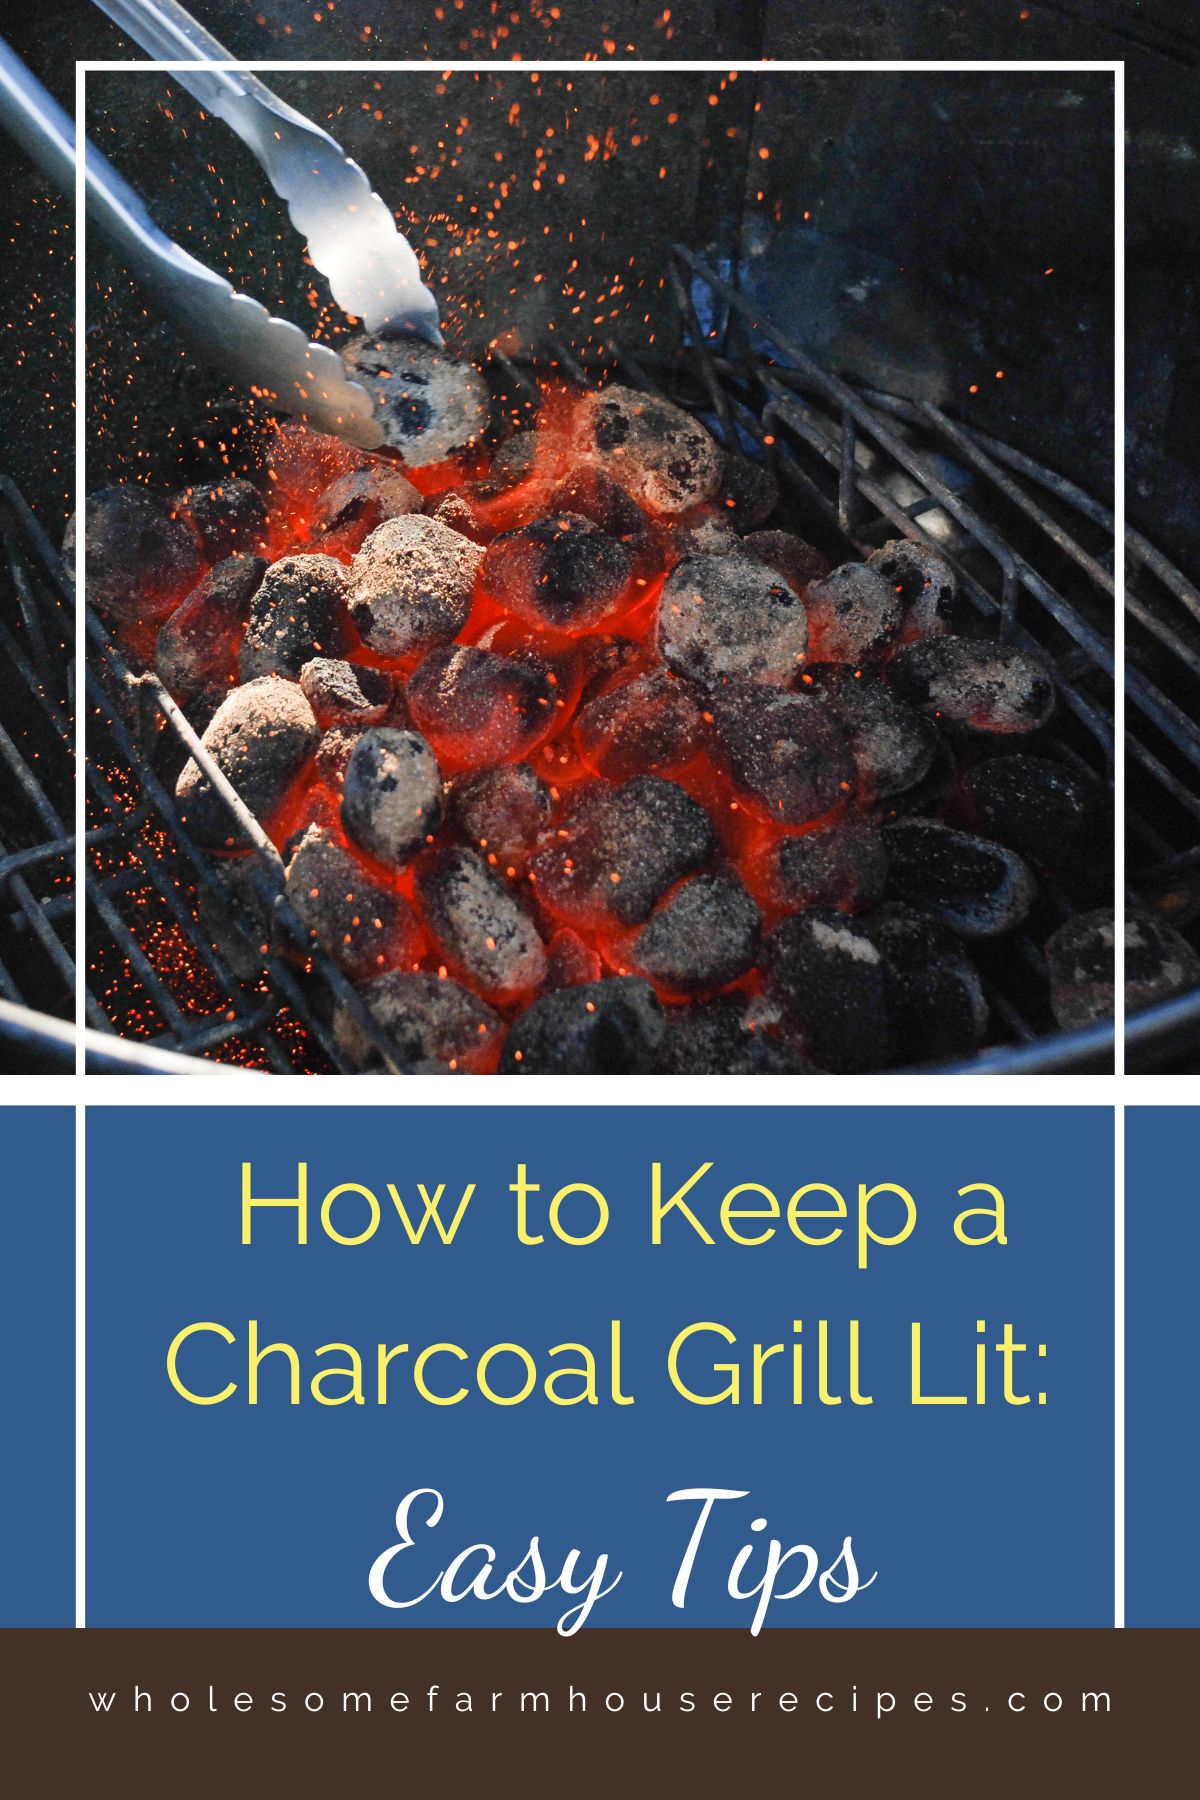 How to Keep a Charcoal Grill Lit Easy Tips